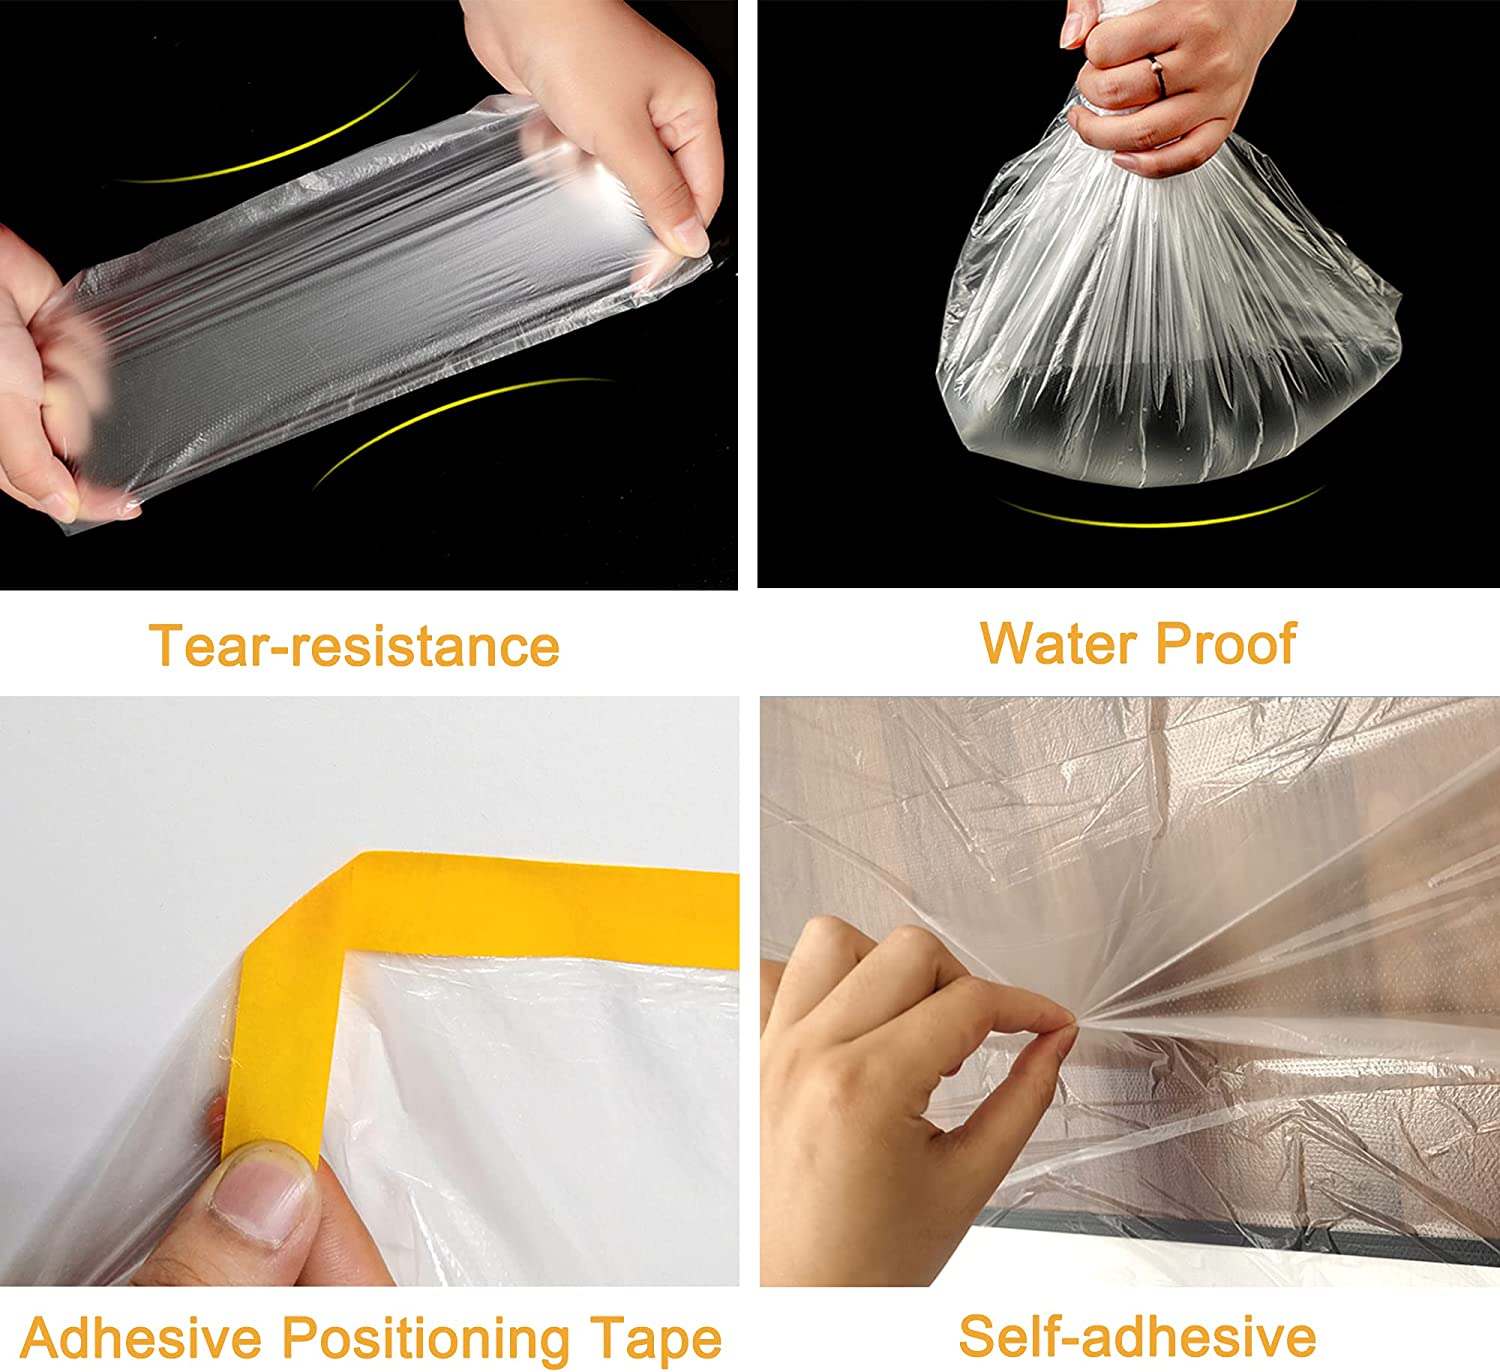 (🔥HOT SALE- SAVE 48% OFF) 5.9ft x 65ft Waterproof Dust-Proof Covering Masking Film (BUY 2 GET 1 FREE)